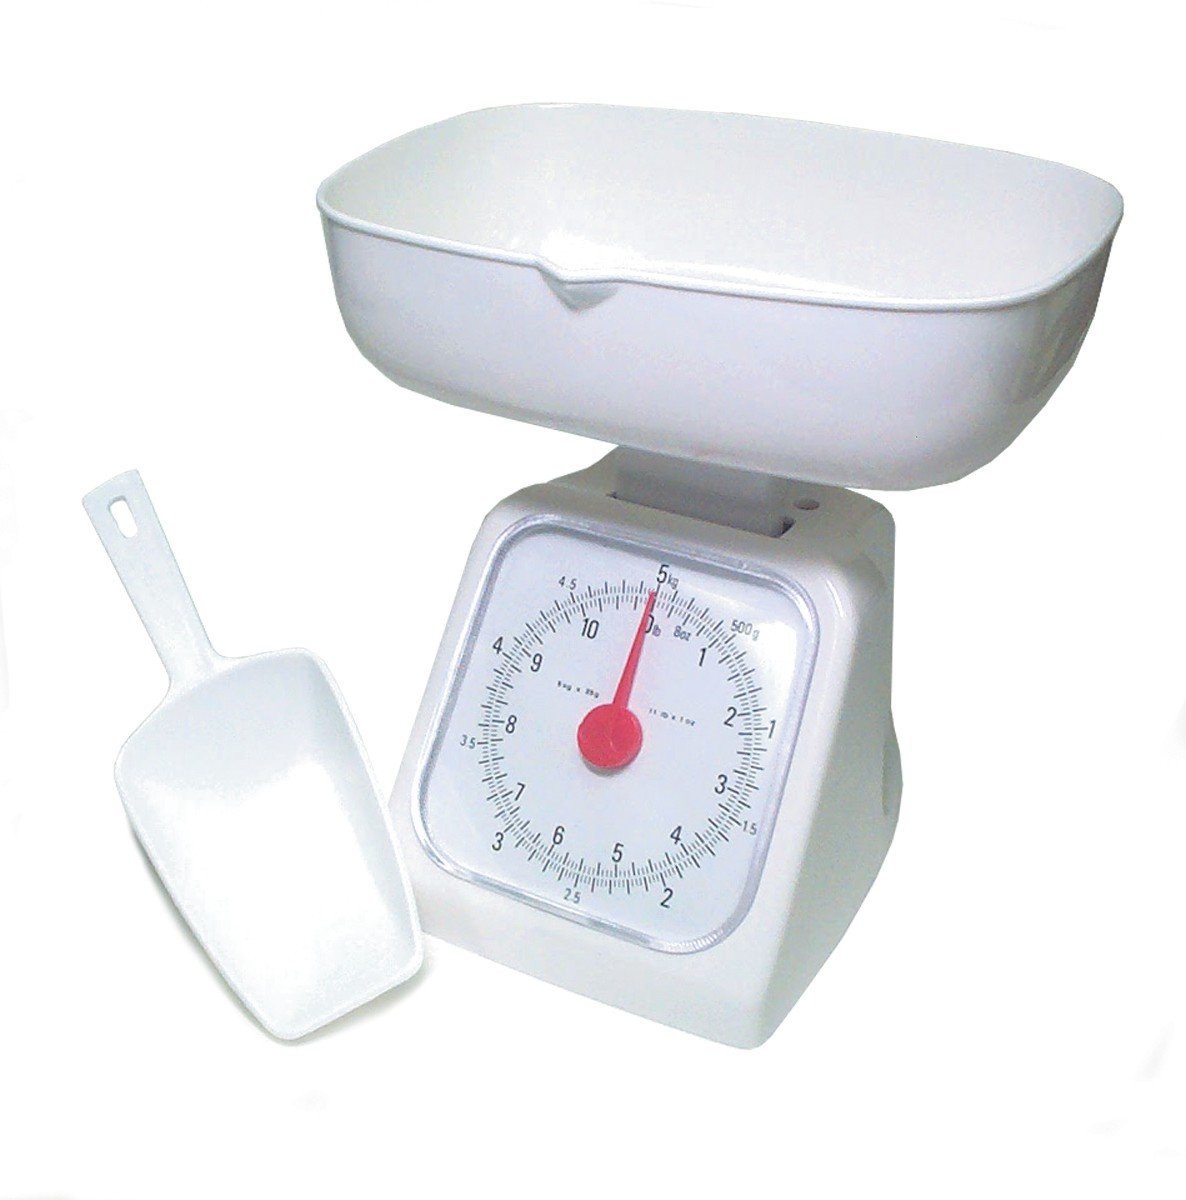 10 lb Capacity Investment Scale